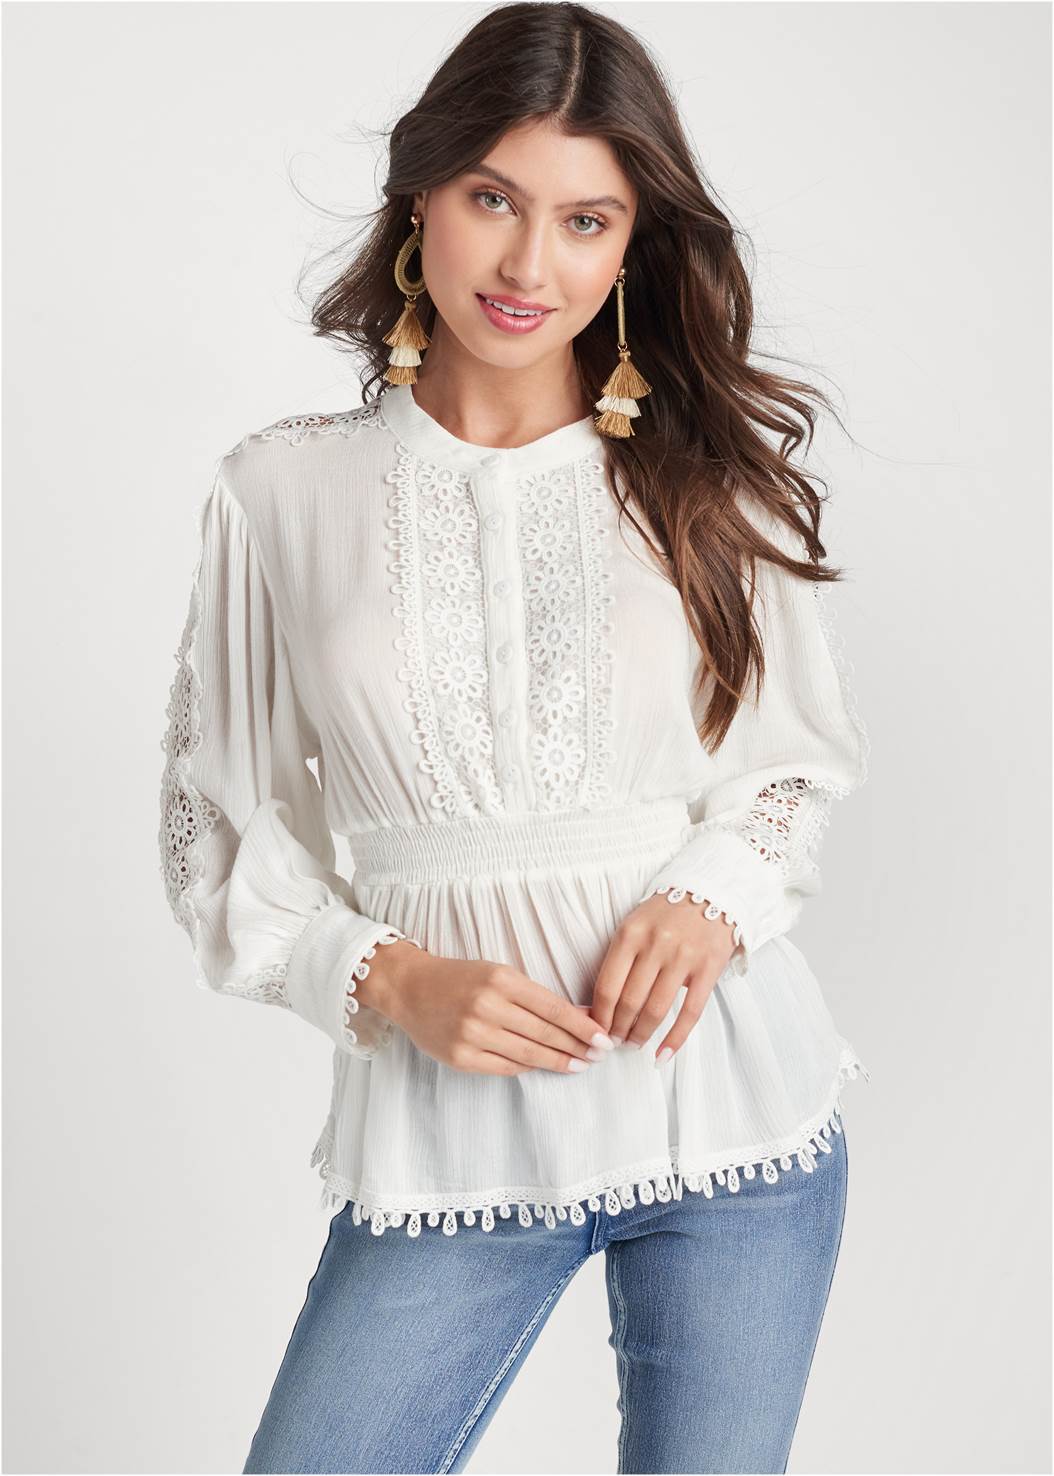 LACE SMOCKED WAIST BLOUSE in White | VENUS